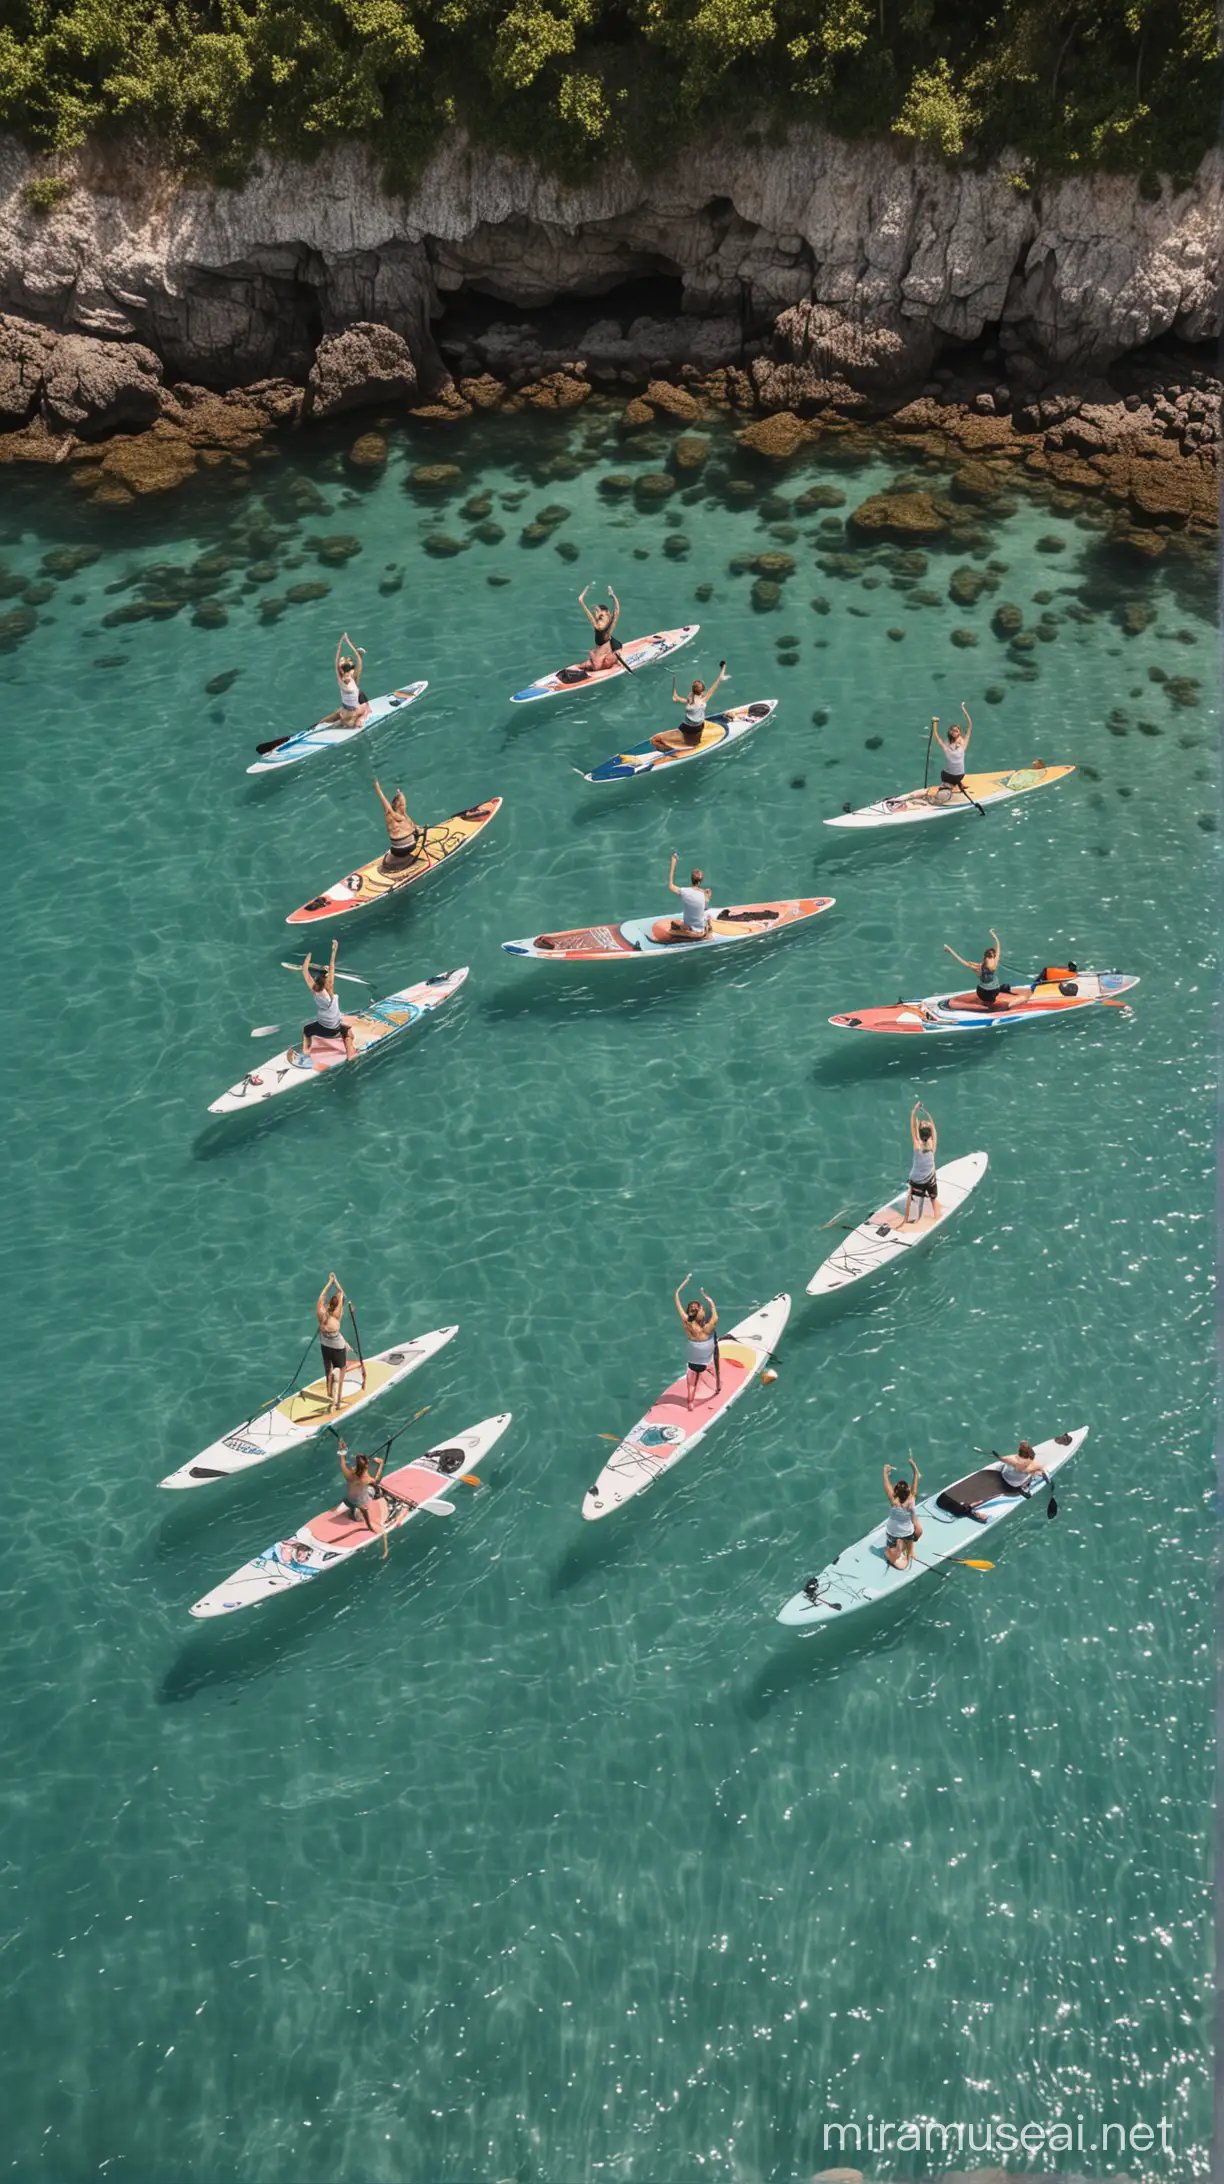 Yoga Enthusiasts Practicing on Paddleboards in the Ocean